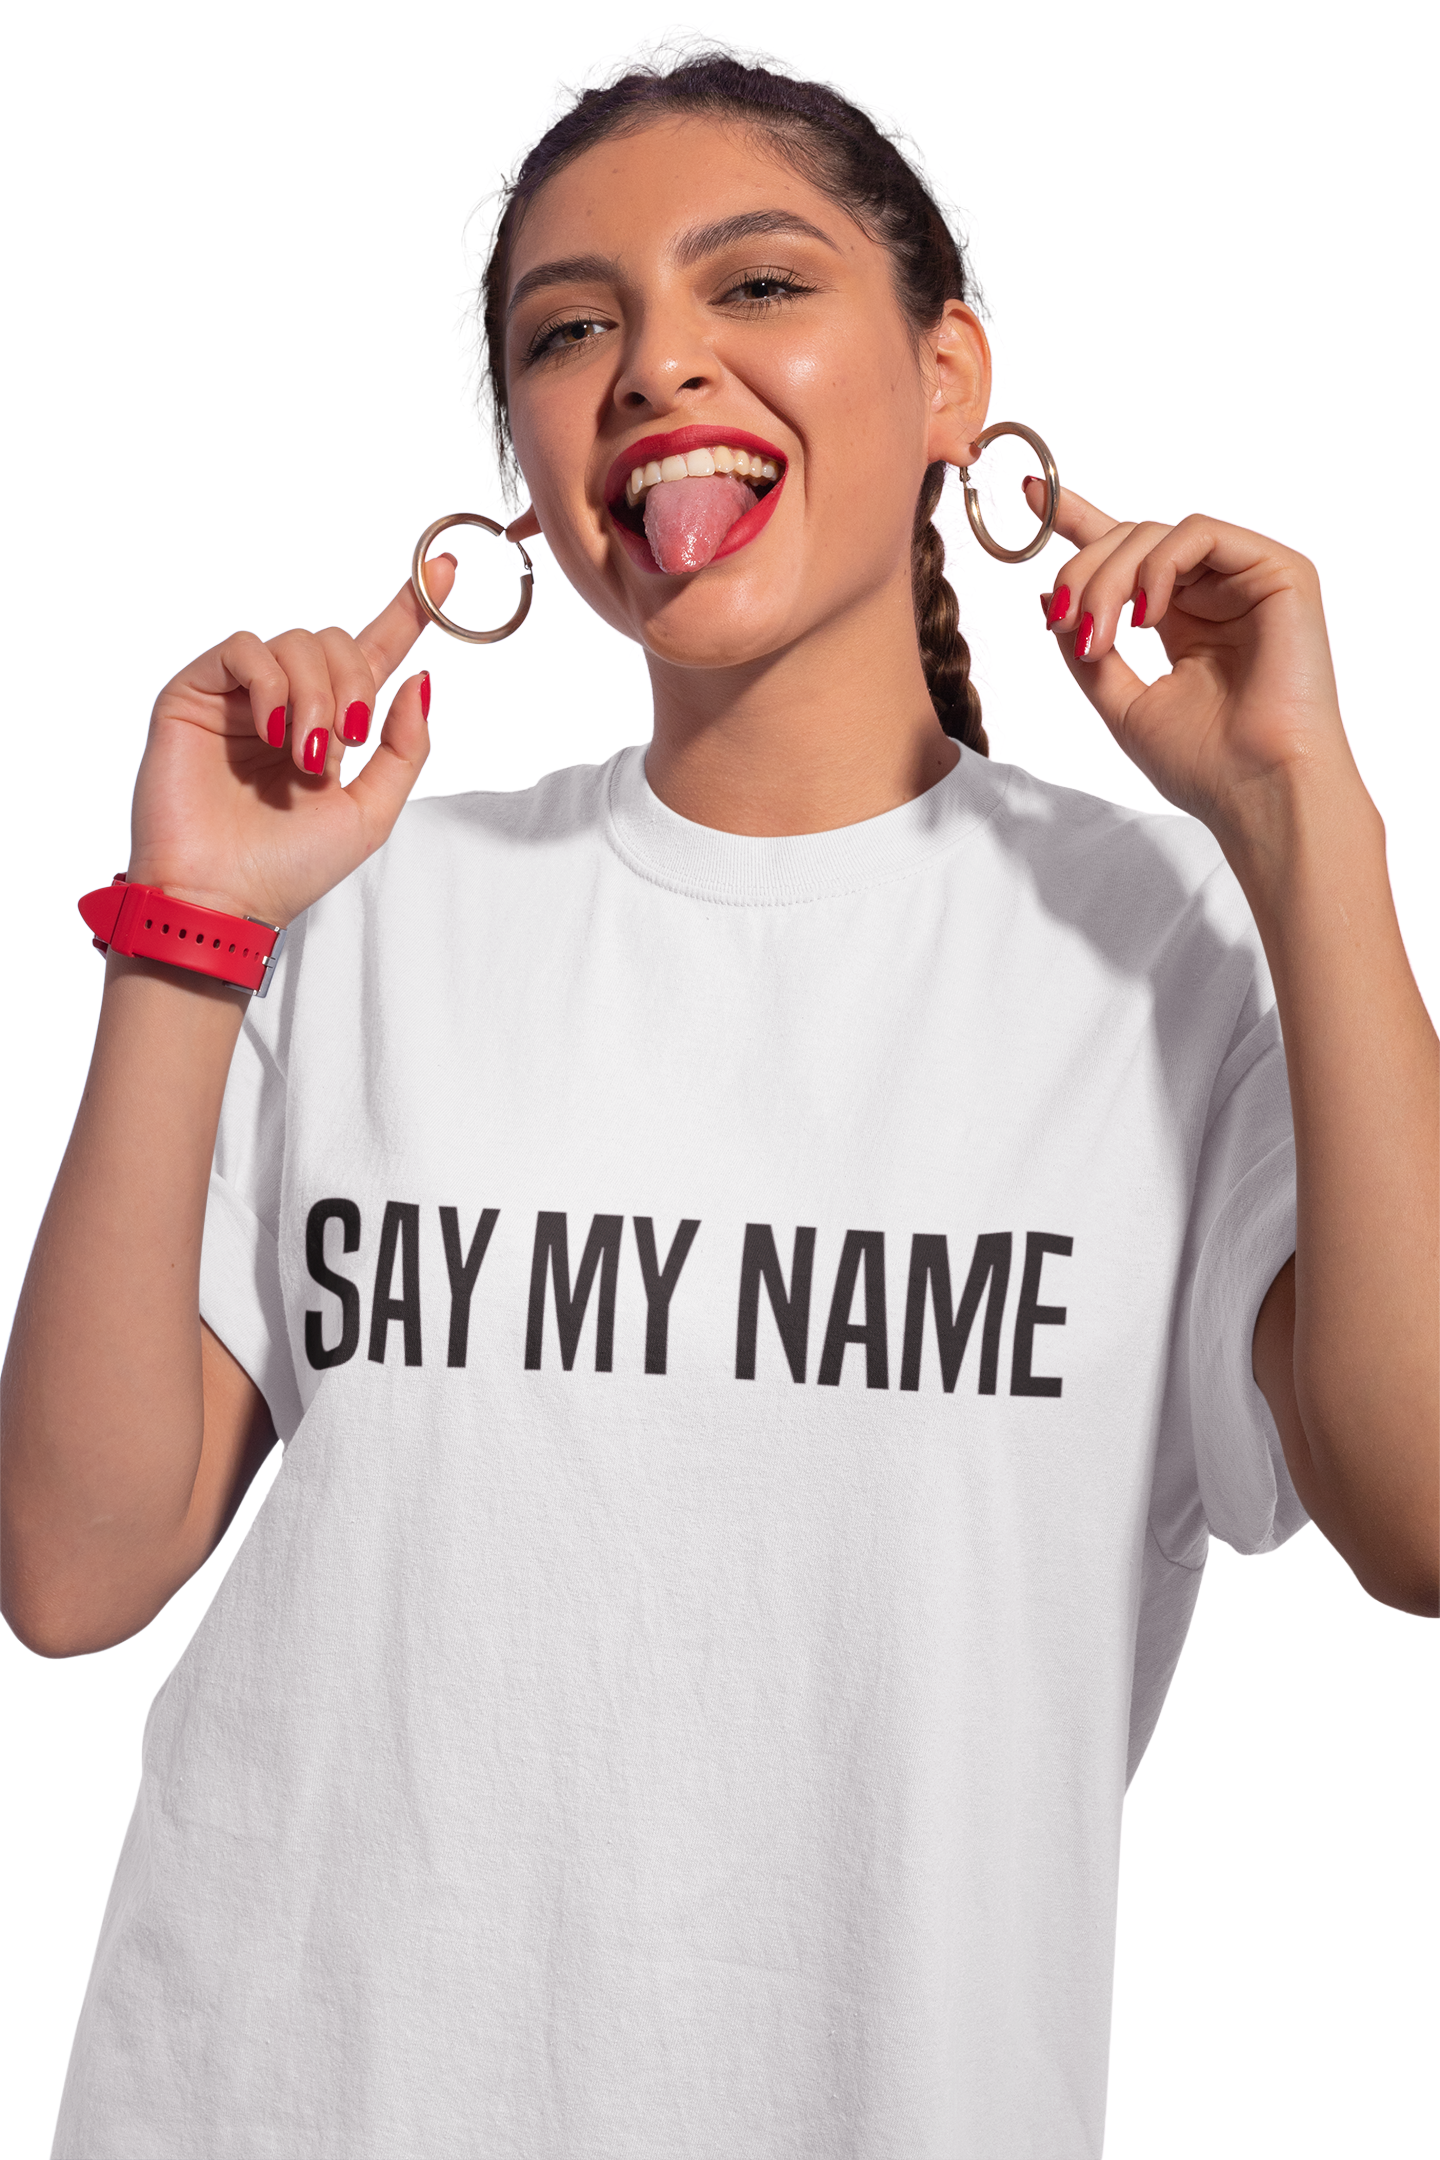 Oversized CSG-T-SHIRT "SAY MY NAME" voor dames